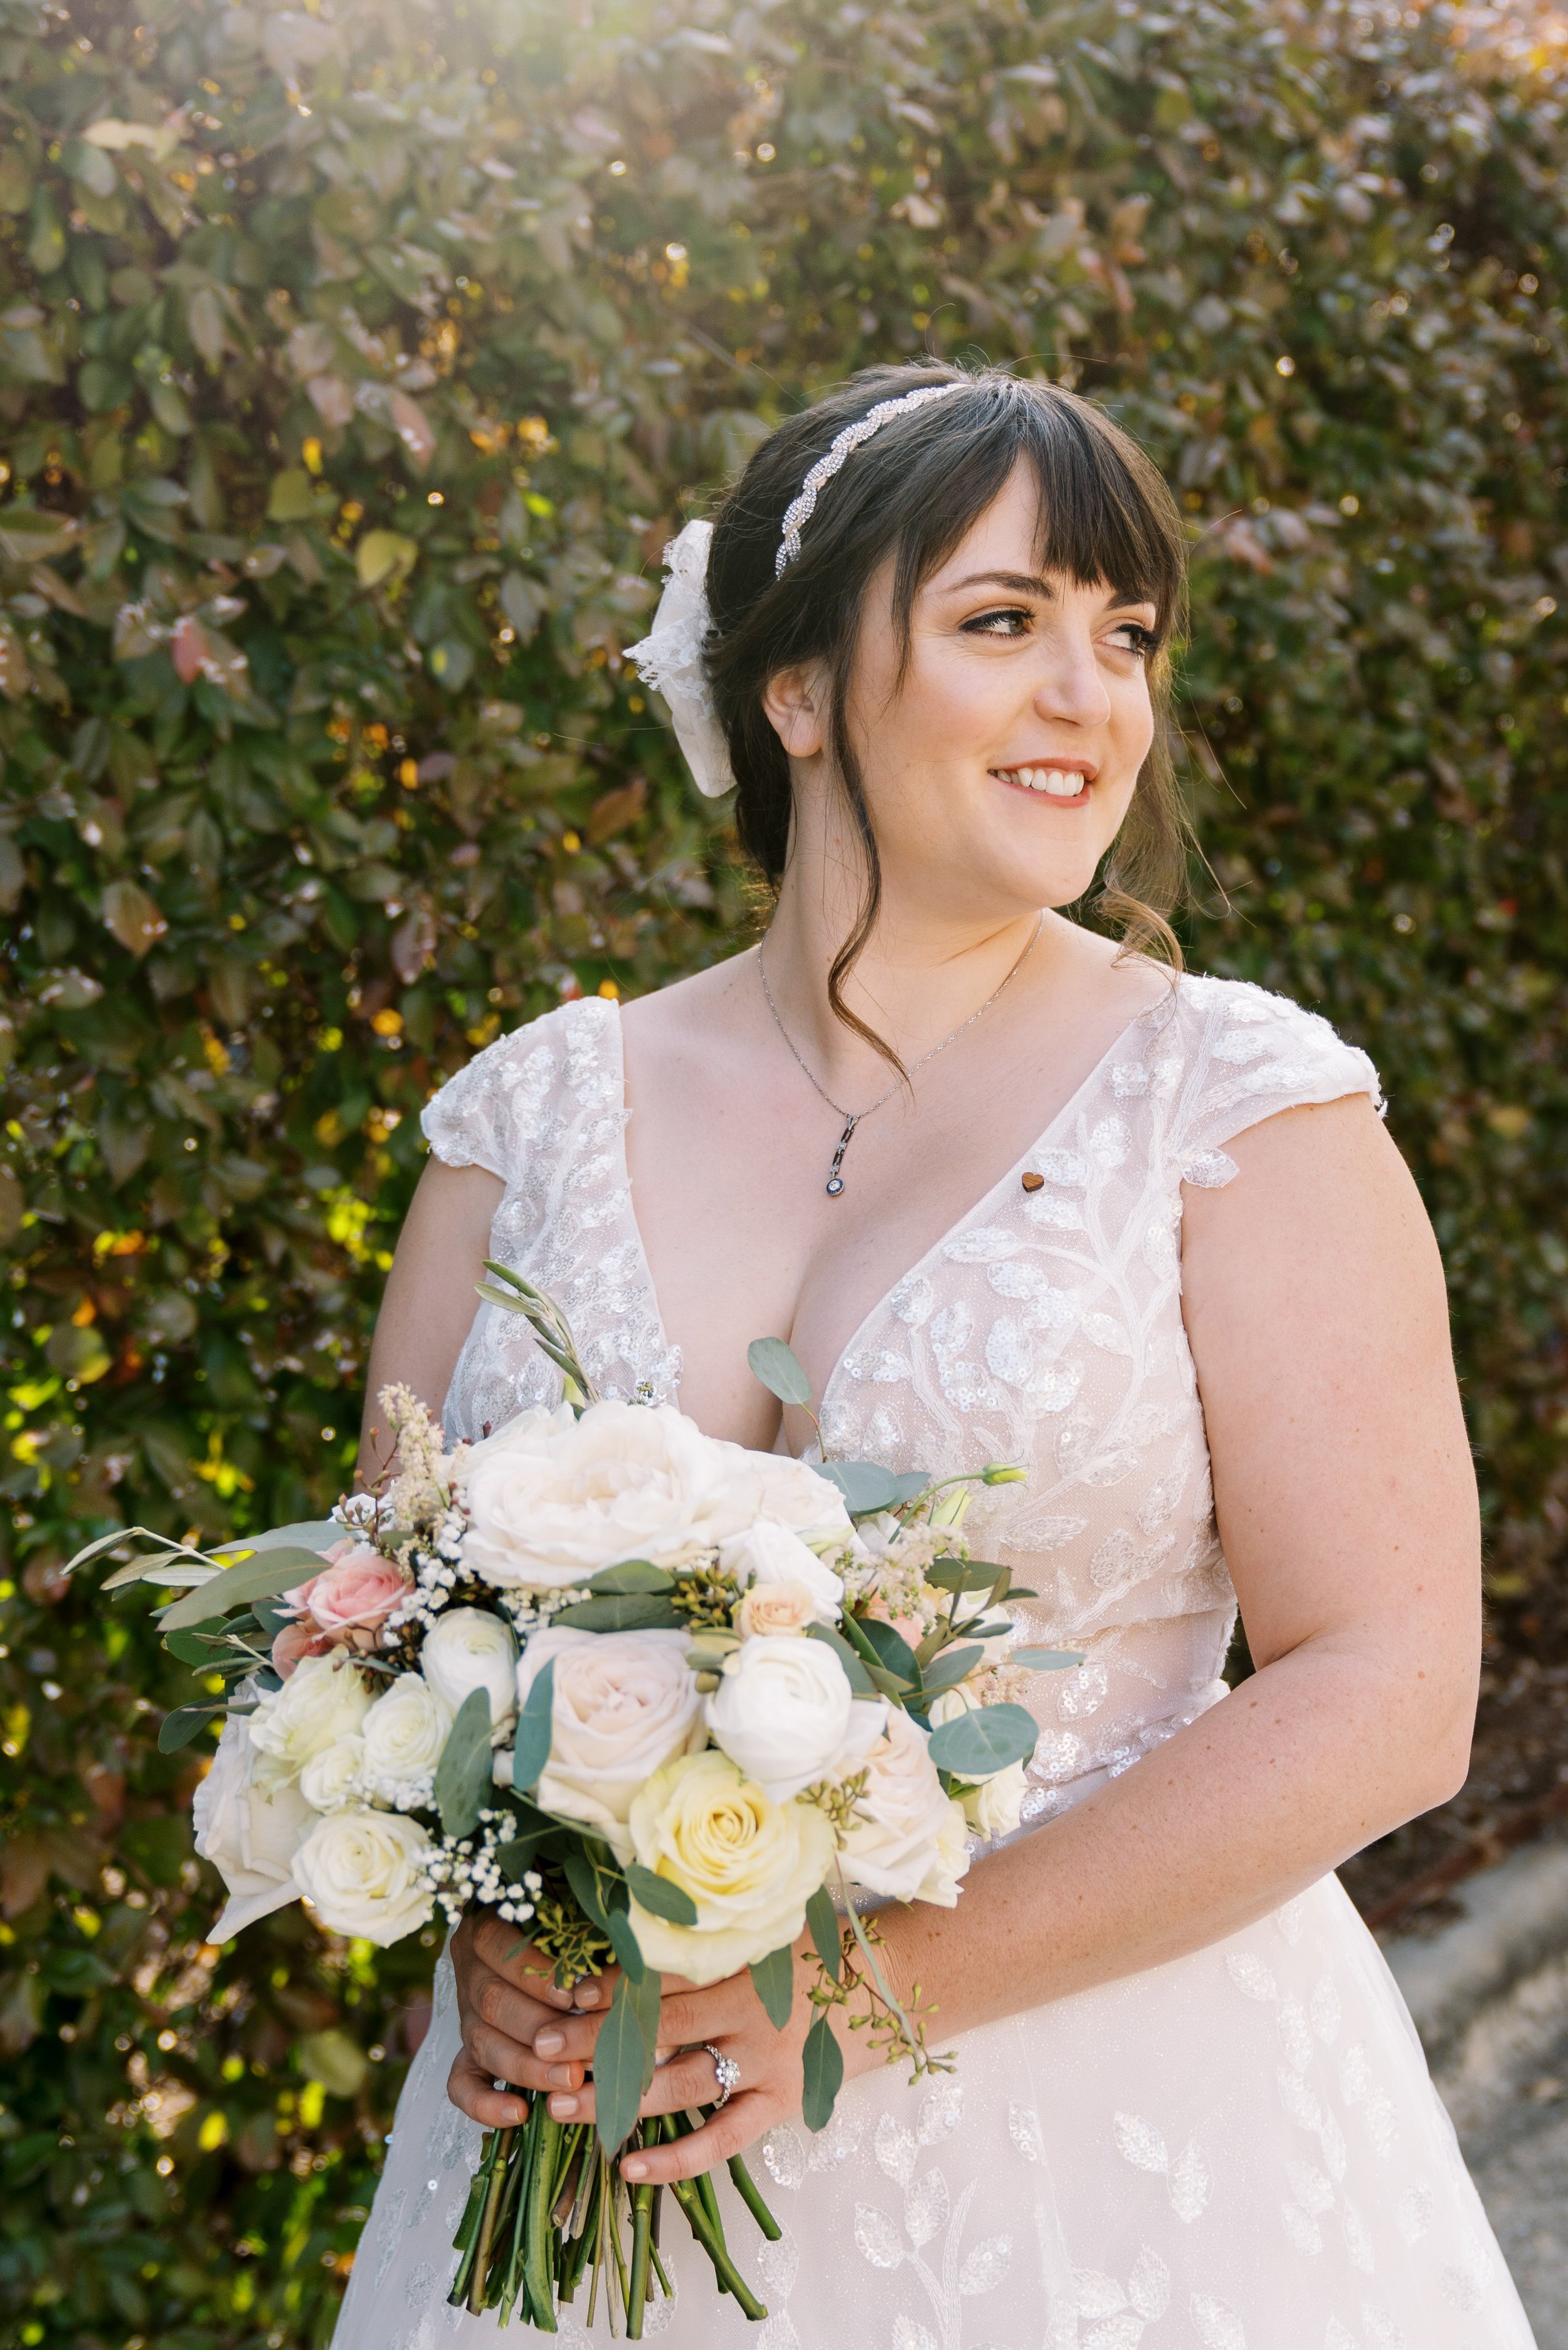 Bride and Bouquet Golden Hour Wedding at All Saints Chapel Raleigh NC Fancy This Photography